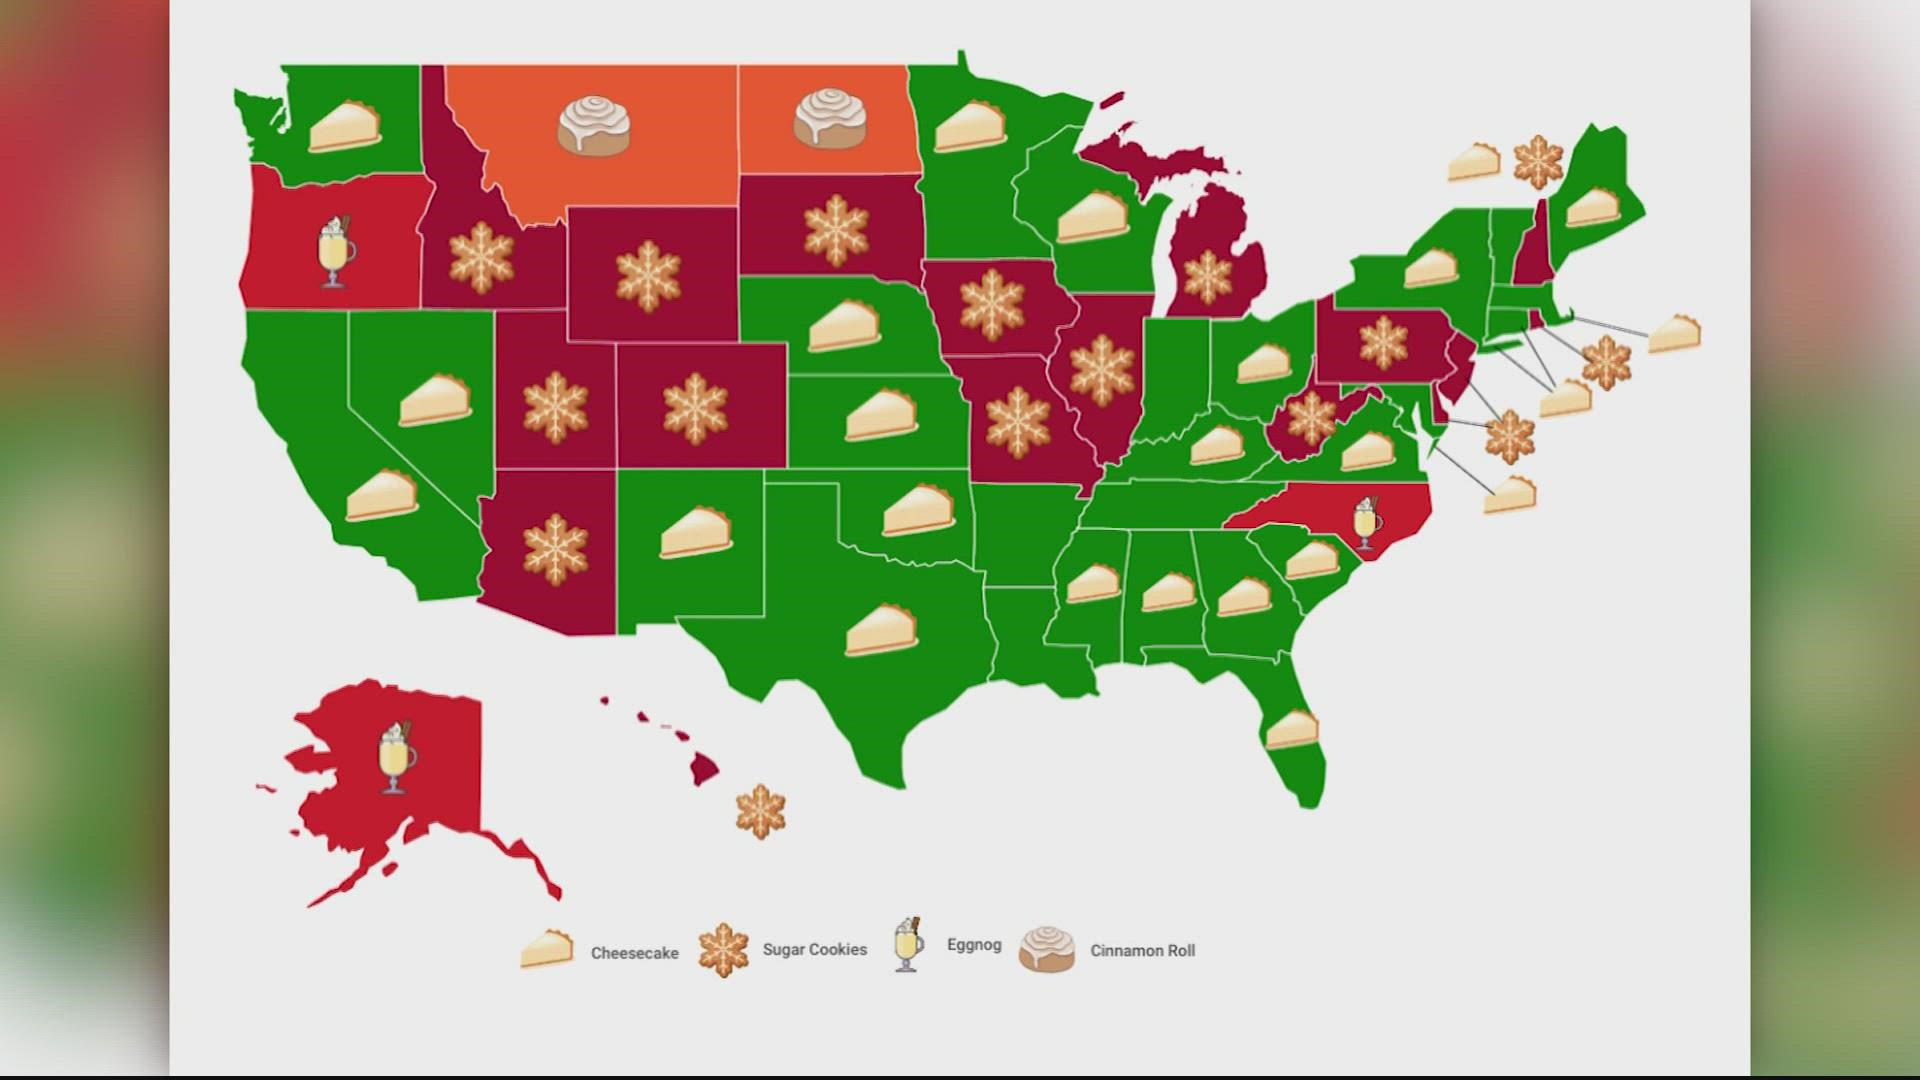 Nationwide, cheesecake topped the list of favorites.
But this survey also ranked treats, state by state.